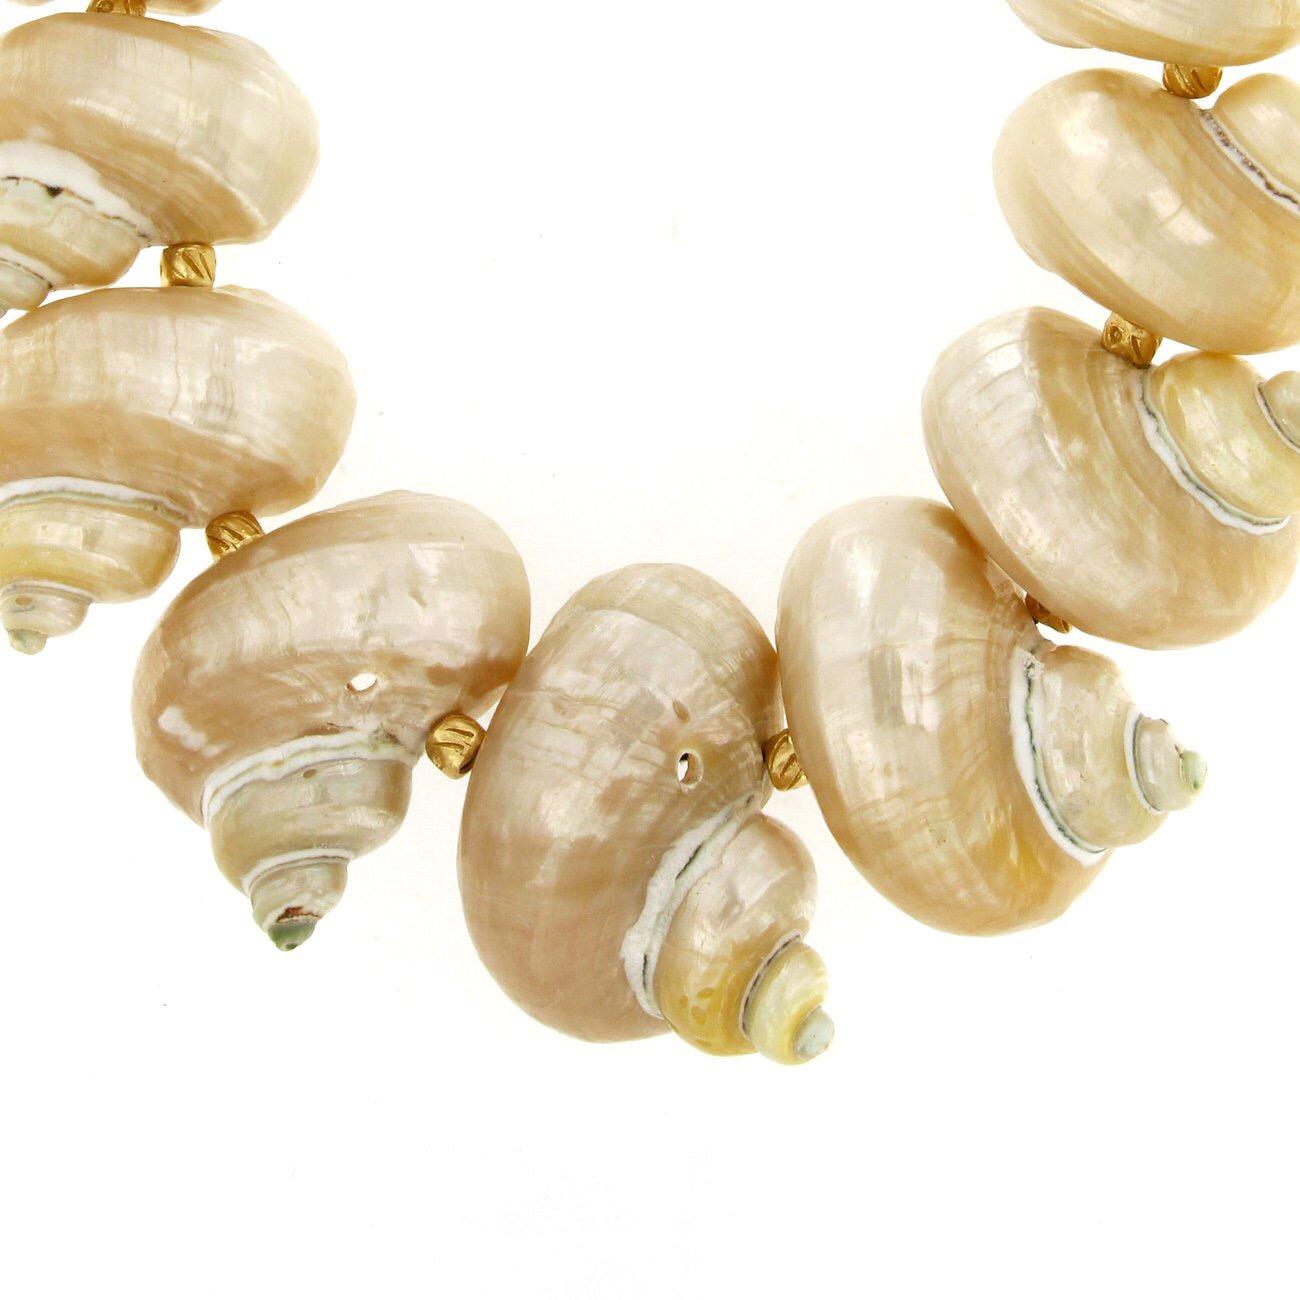 Hand thread shells and artisan made beading. Individually cast; each piece is unique, which we believe is what gives it its beauty. Nickel and lead free. Approximately 40cm long, depending on shell sizes.
As well as giving her name to a particular